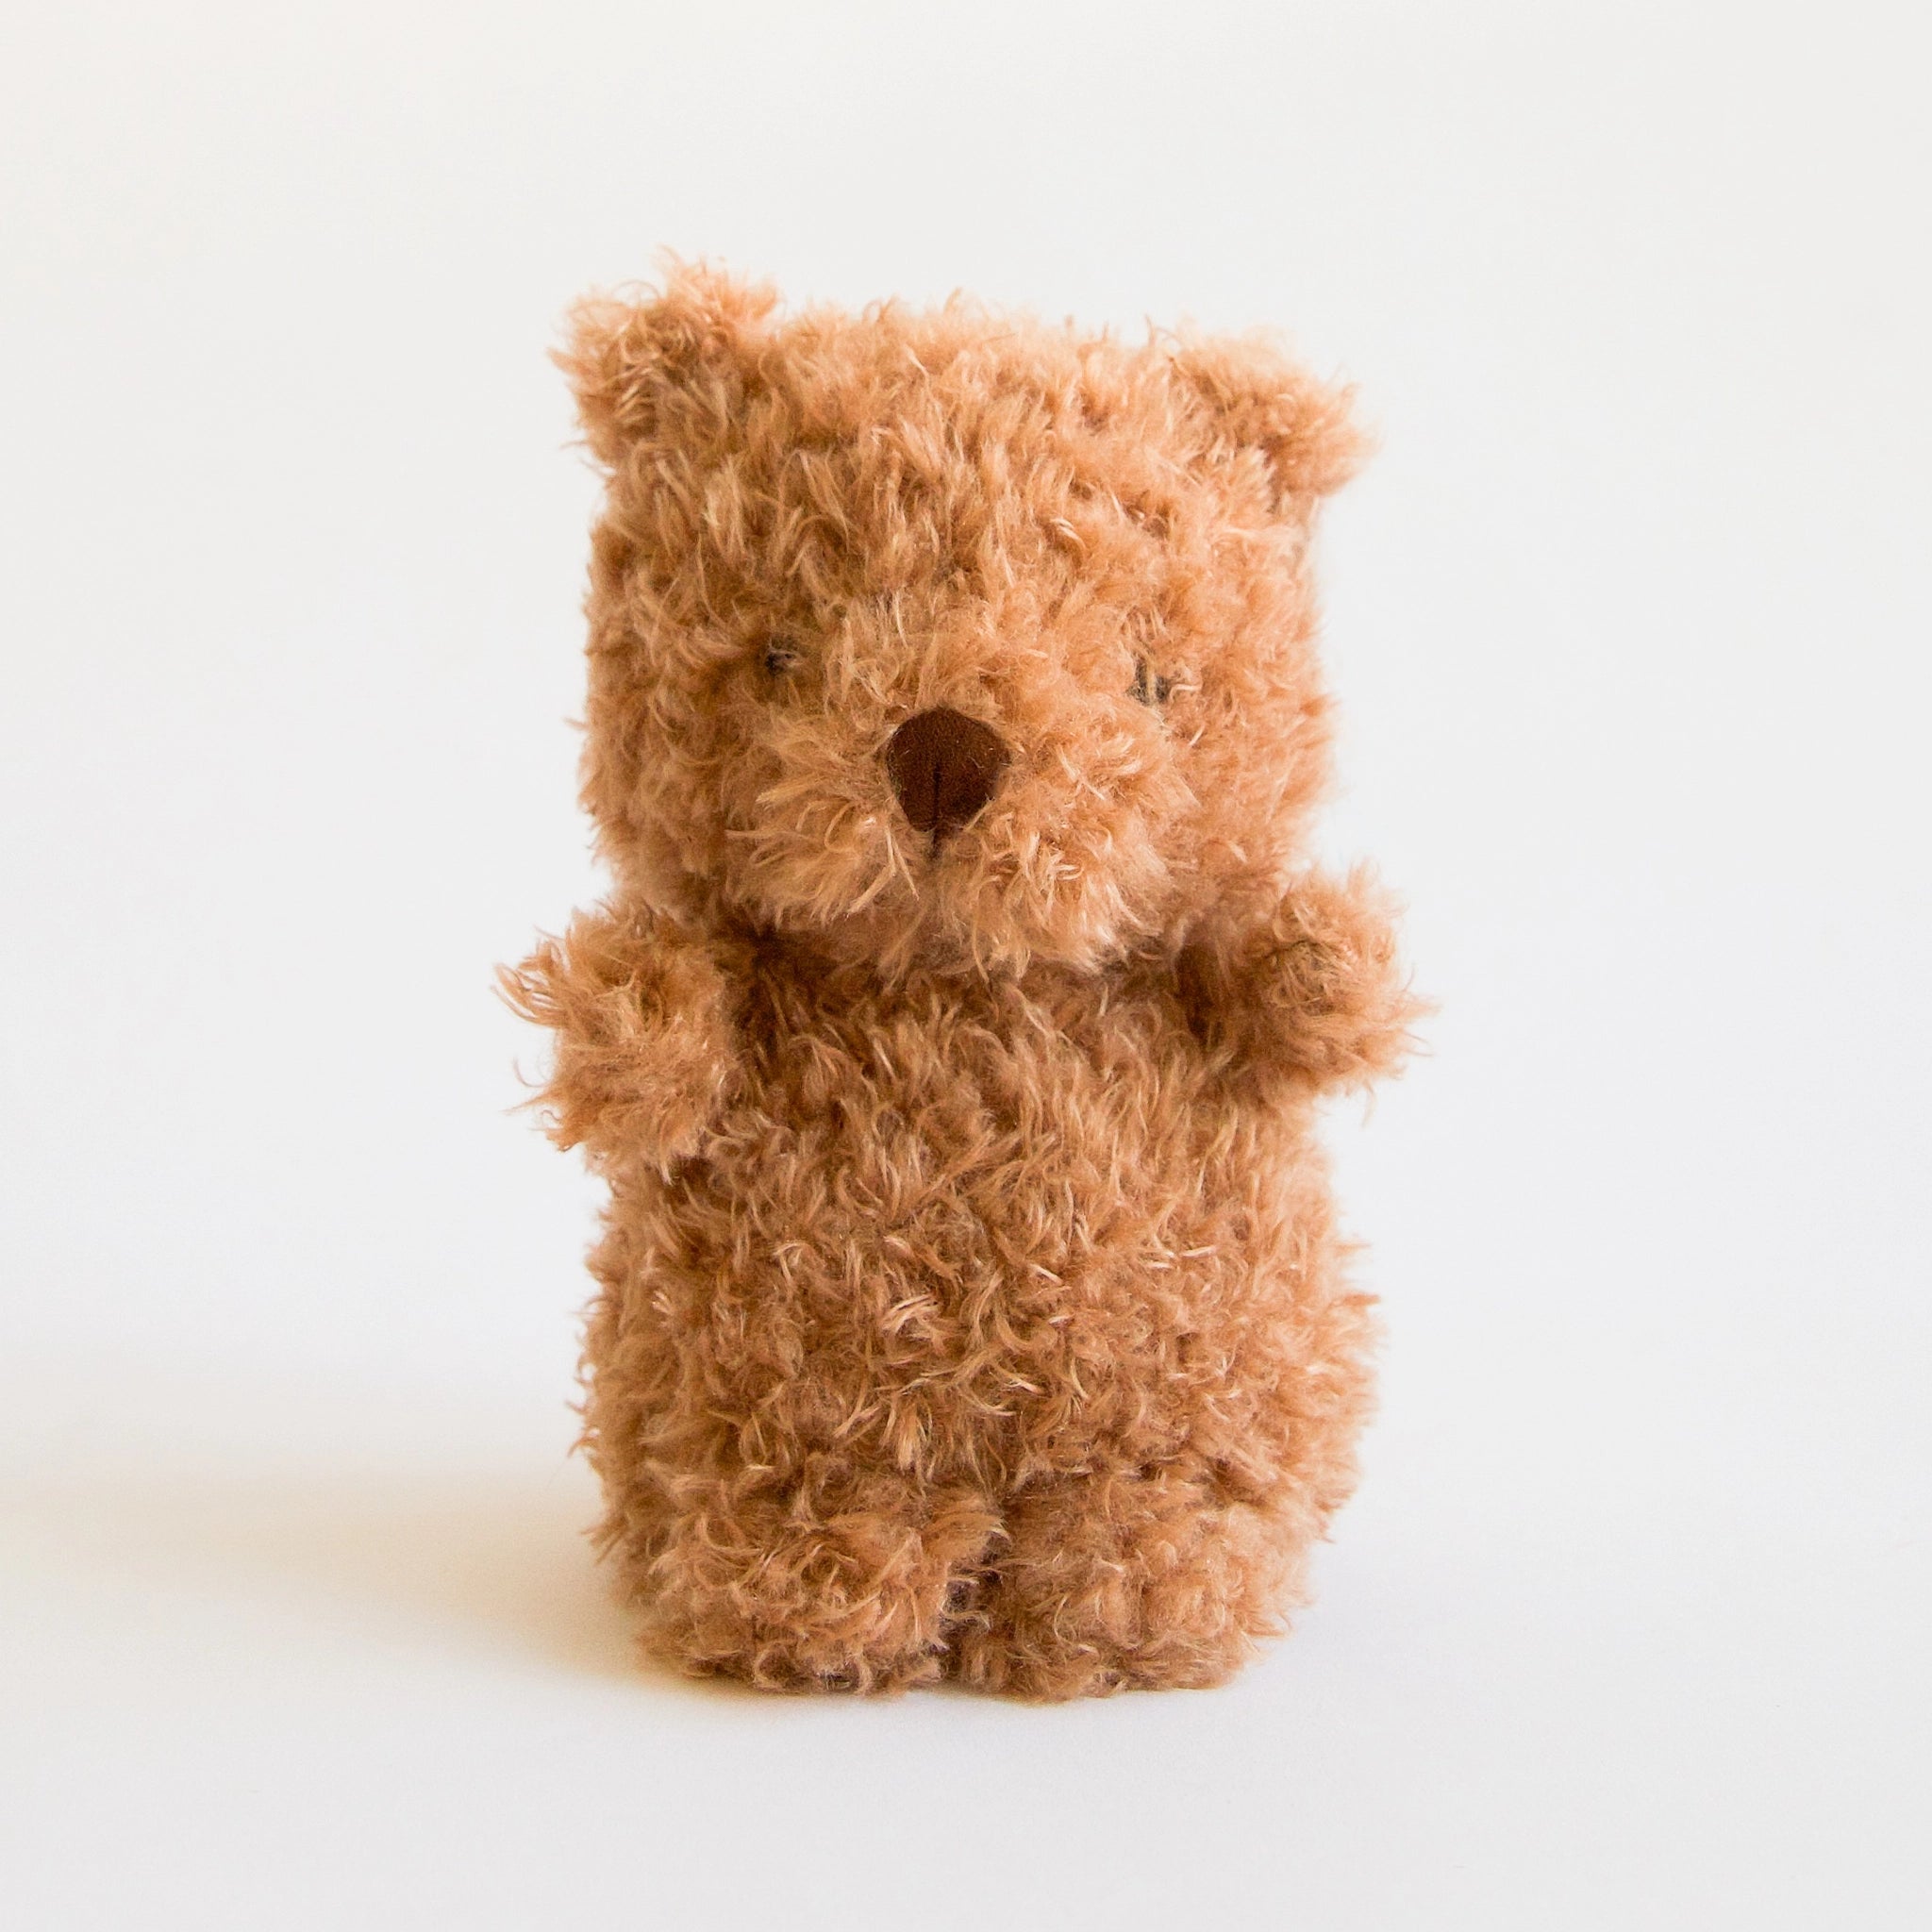 A small cuddly bear stuffed animal with chestnut brown fur, a brown nose and small little ears.